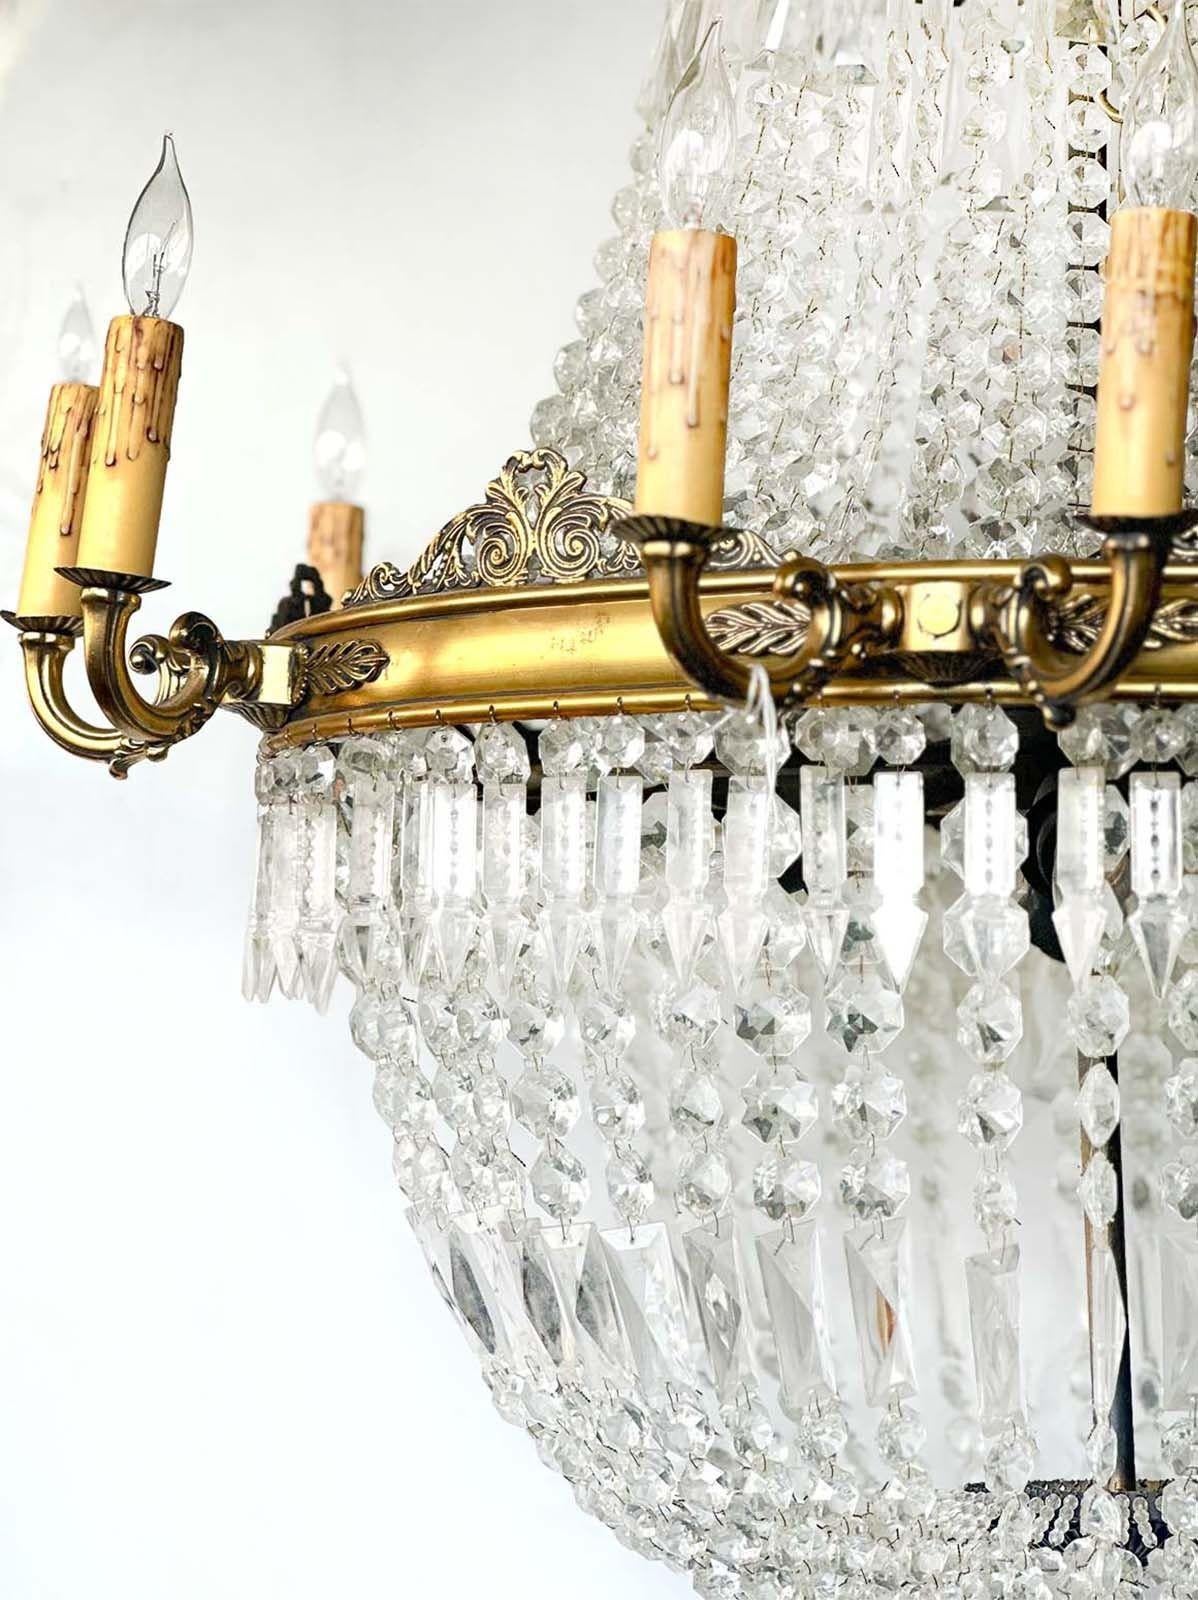 Magnificent French Empire-style bell shaped chandelier made in the 1920's  with rich bronze and fine glass. Consists of twelve candelabra lights on the outside and four on the inside. This fixture has been rewired to fit US light standards and the